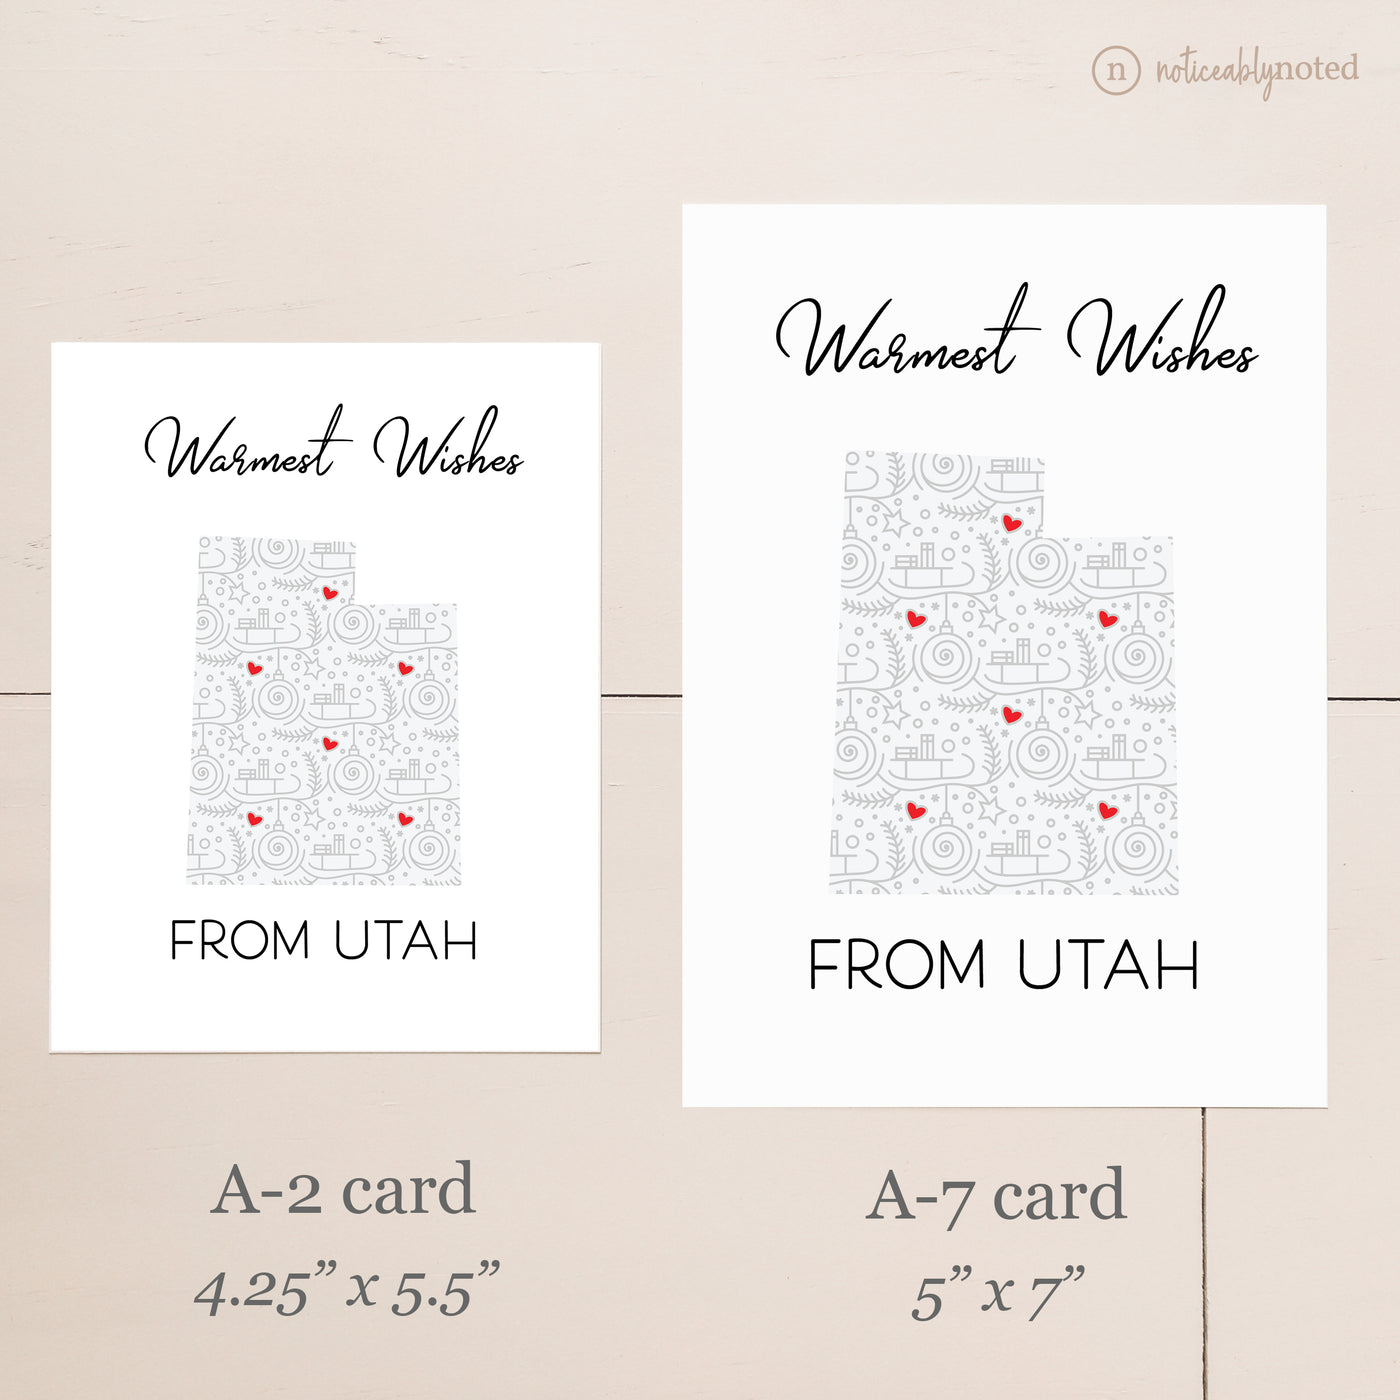 Utah Christmas Card - Card Size Comparison | Noticeably Noted